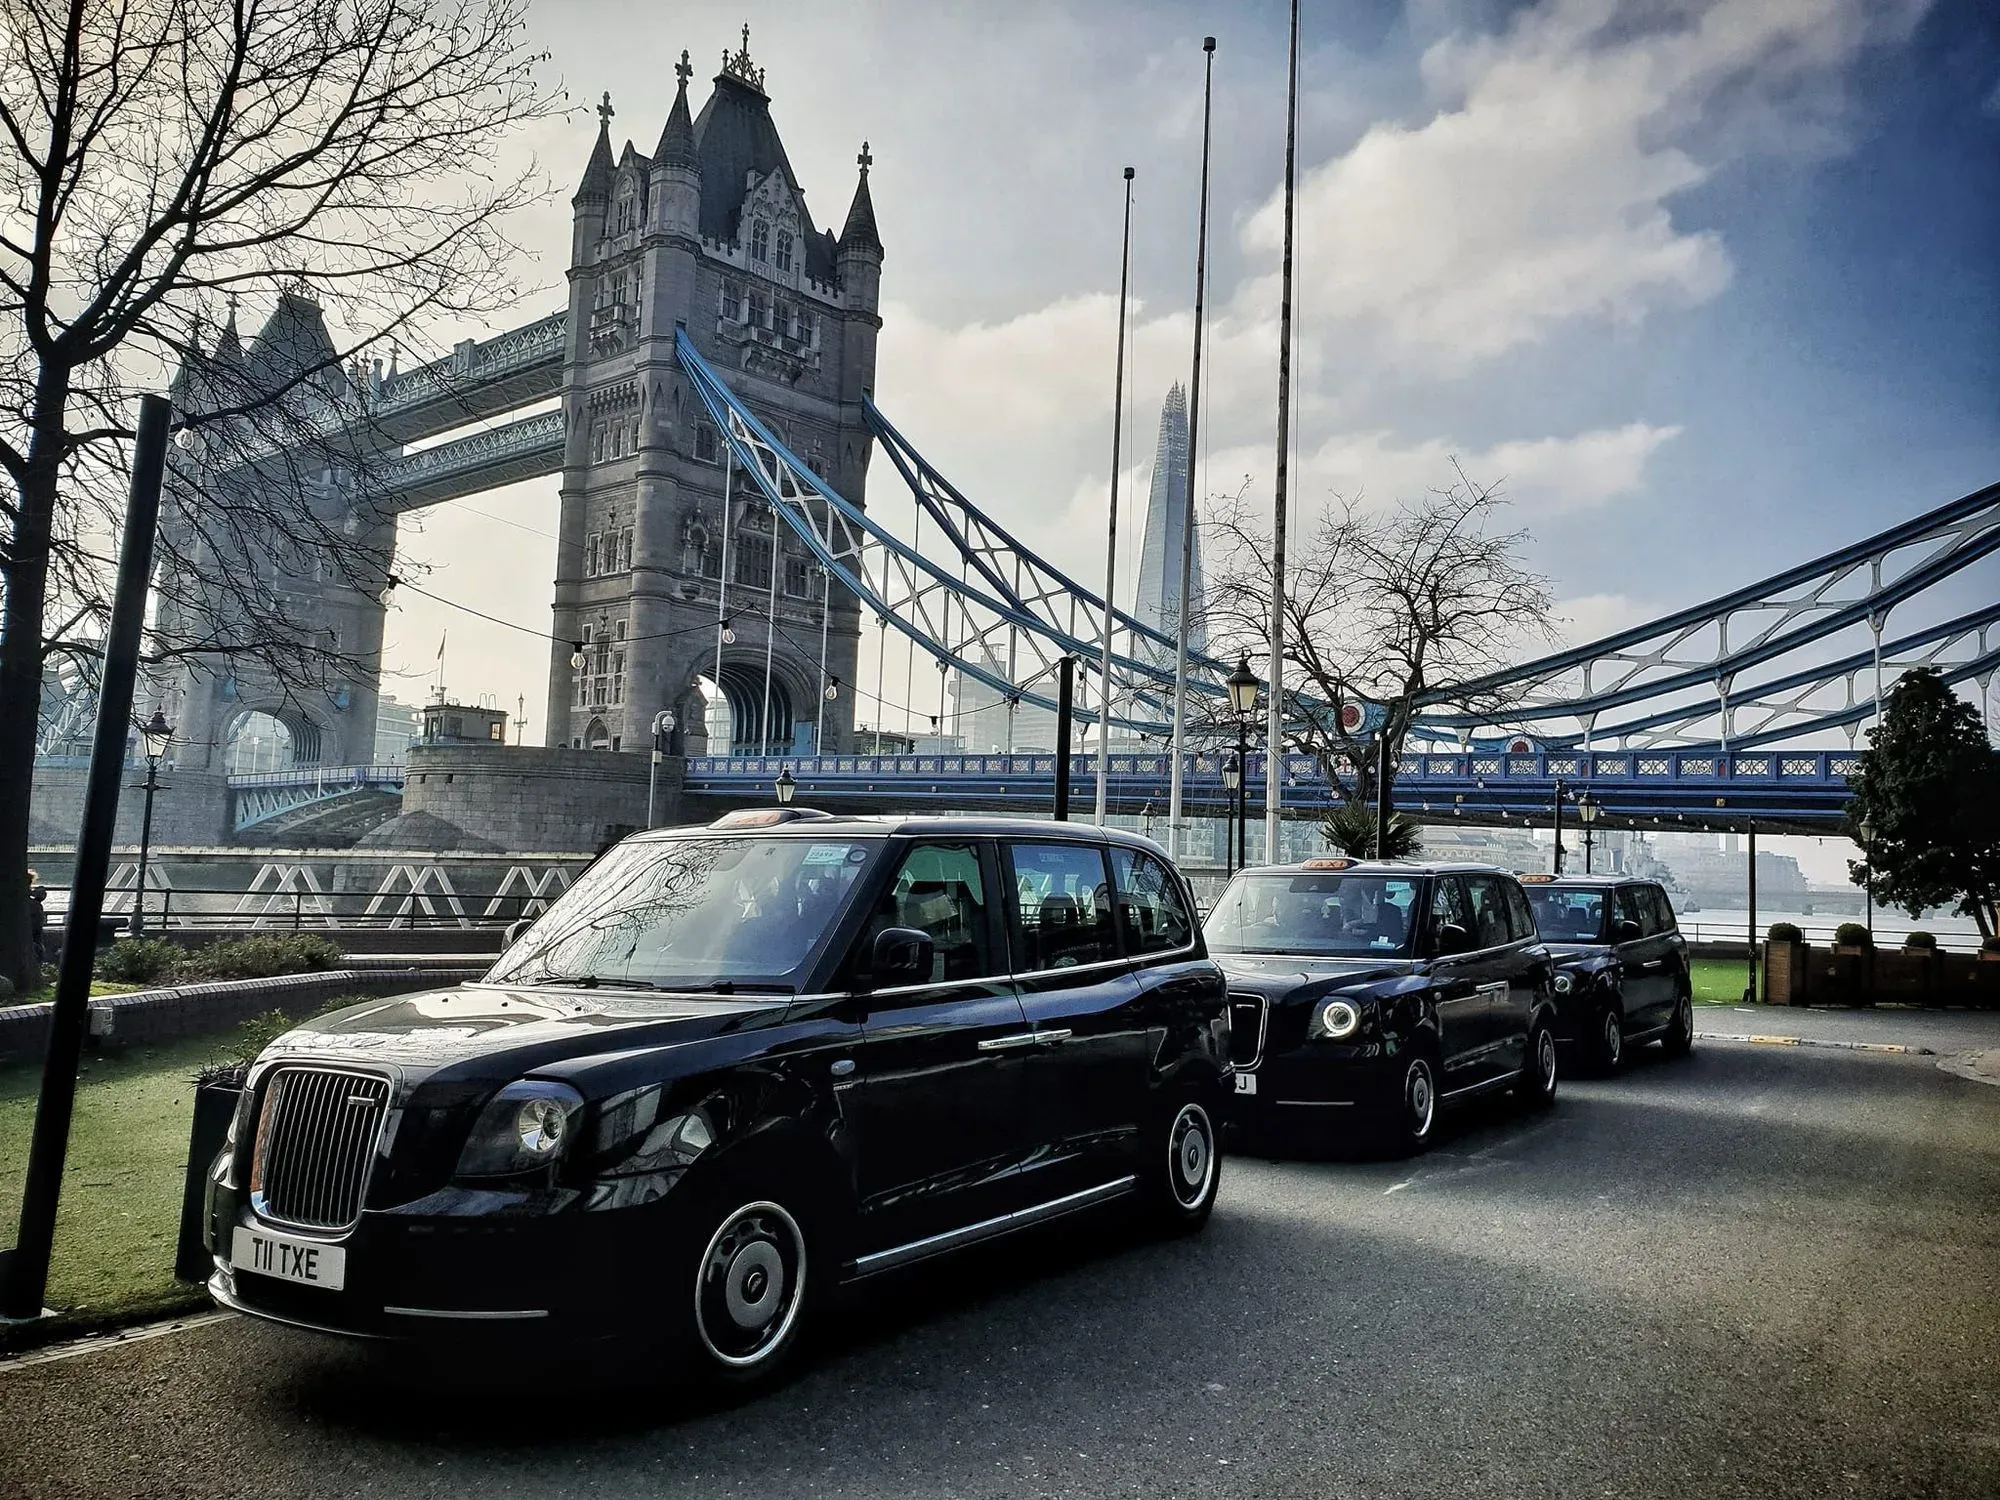 The authentic black cab will take you to the filming locations of the famous films. Buy Harry Potter Locations tour tickets.